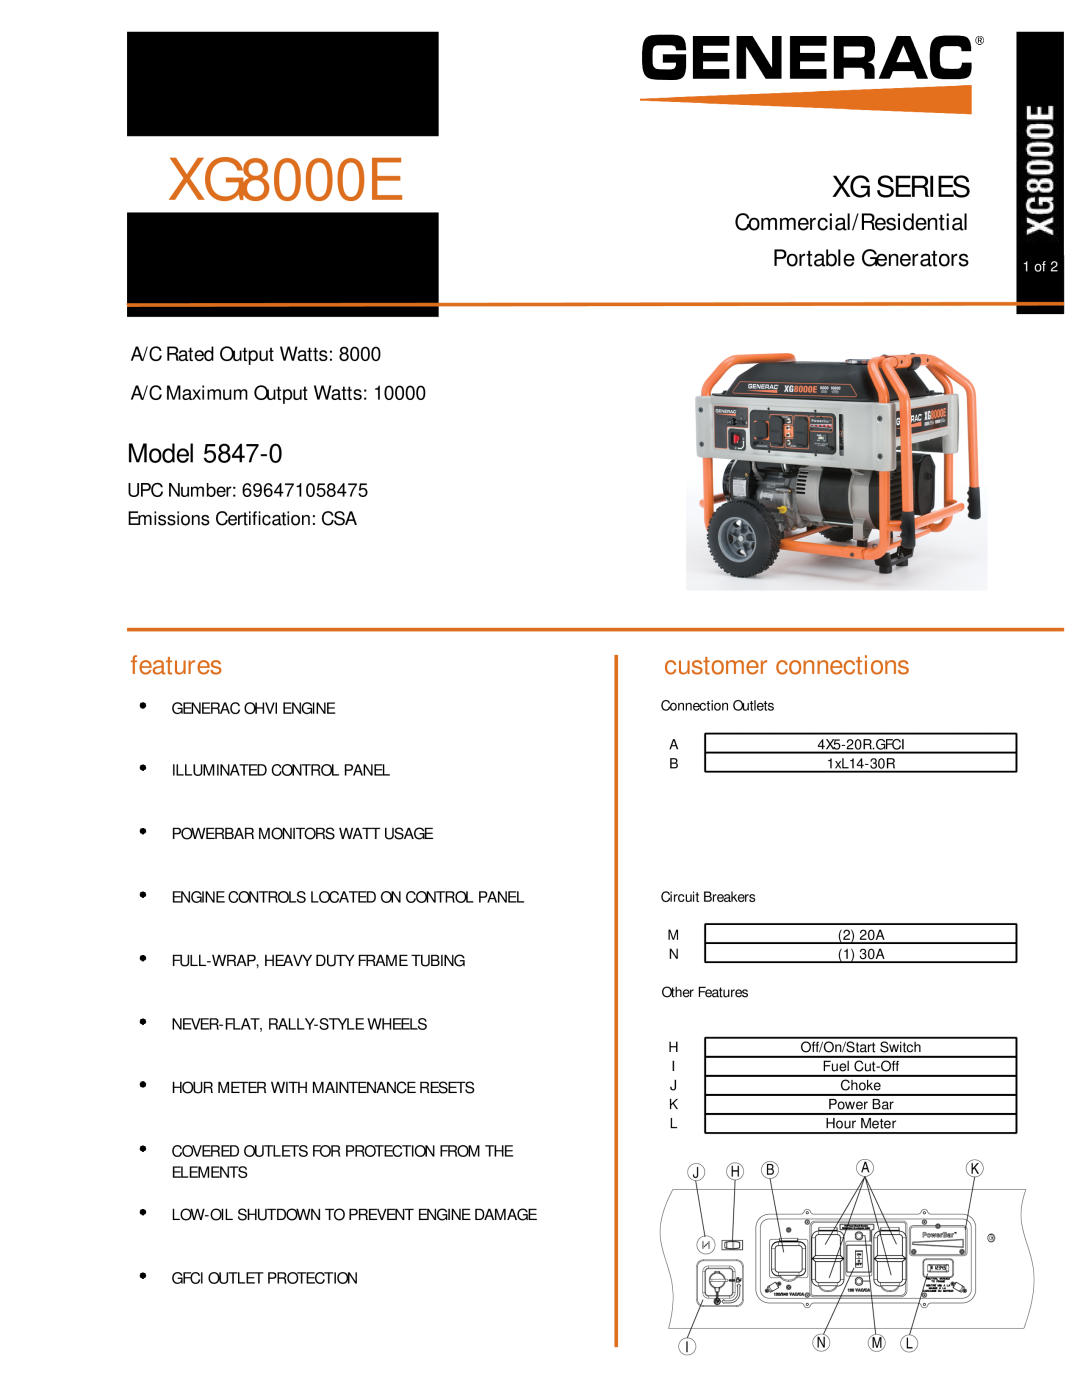 Generac 5847-0 manual Model, XG8000E, features, customer connections, Xg Series, UPC Number Emissions Certification CSA 